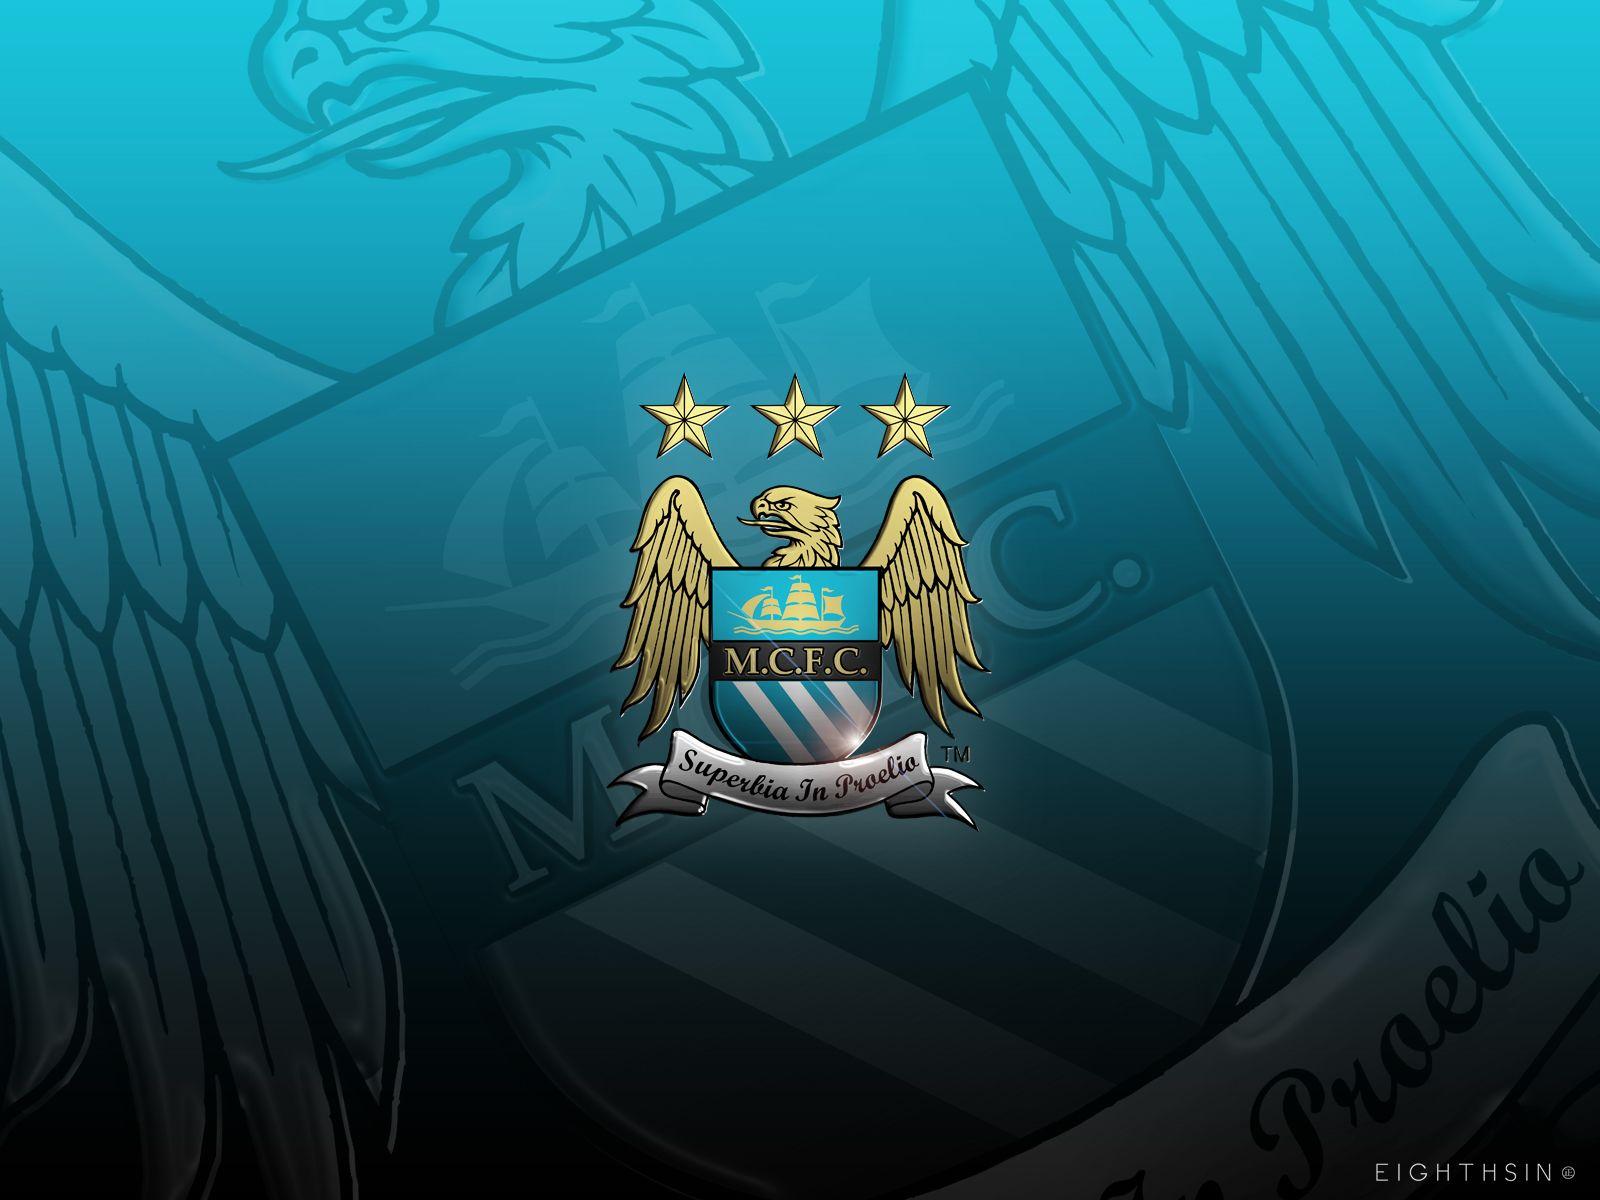 Manchester City Logos Wallpapers Wallpaper Cave